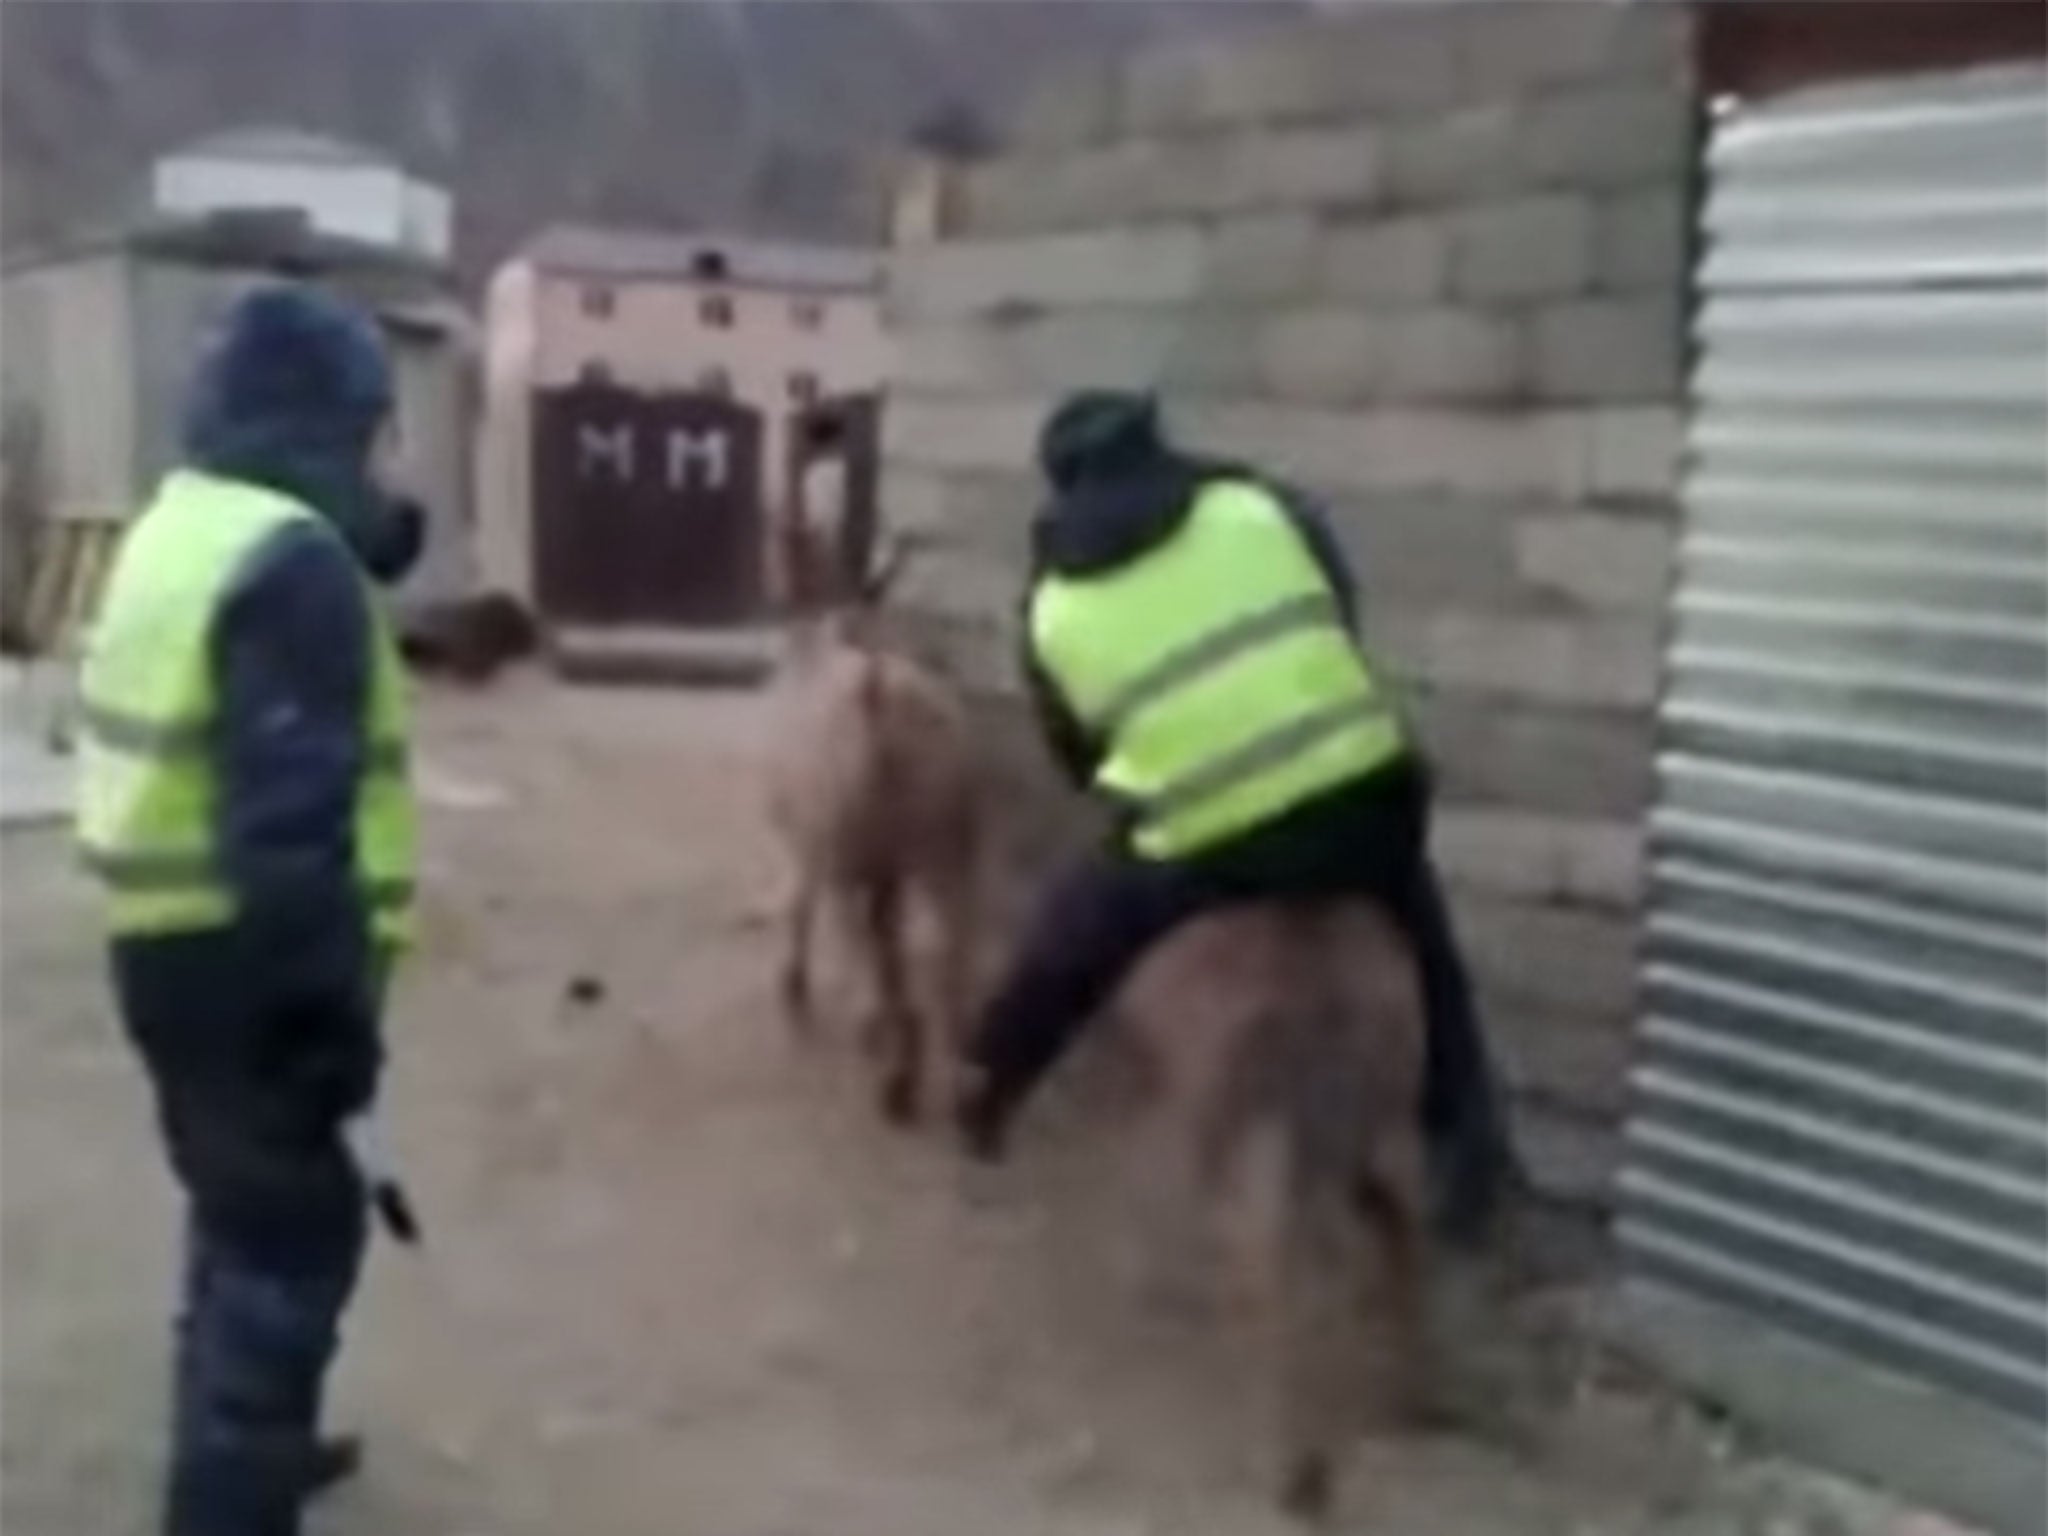 The hilarious video came from police officers in Republic of Dagestan